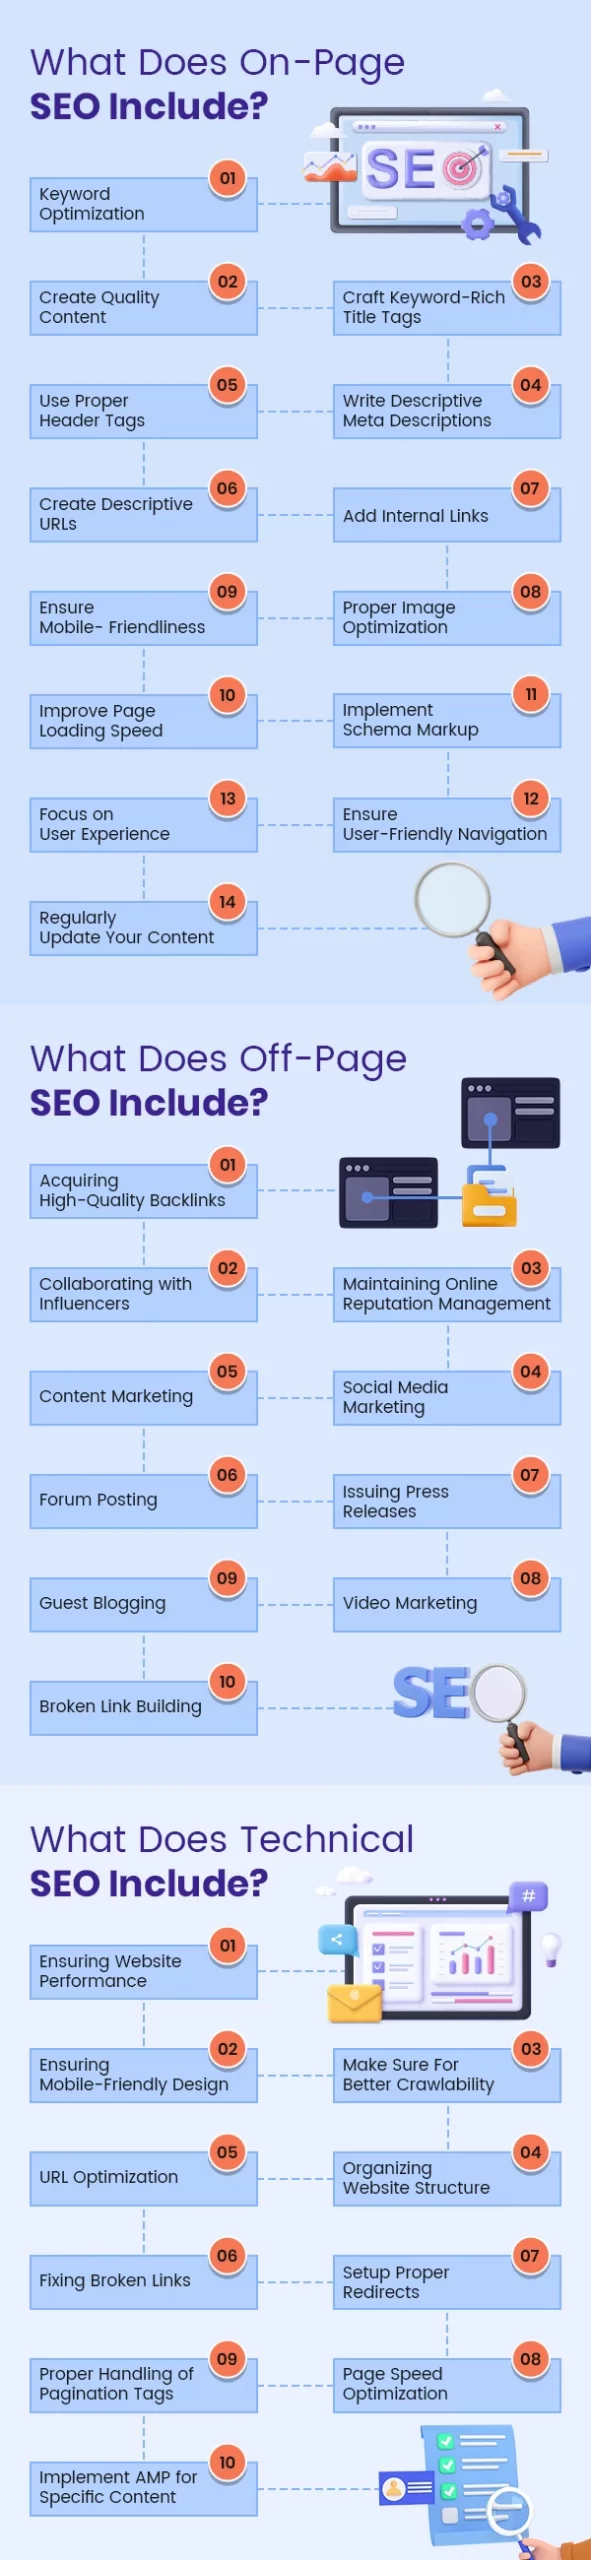 What Does SEO Include